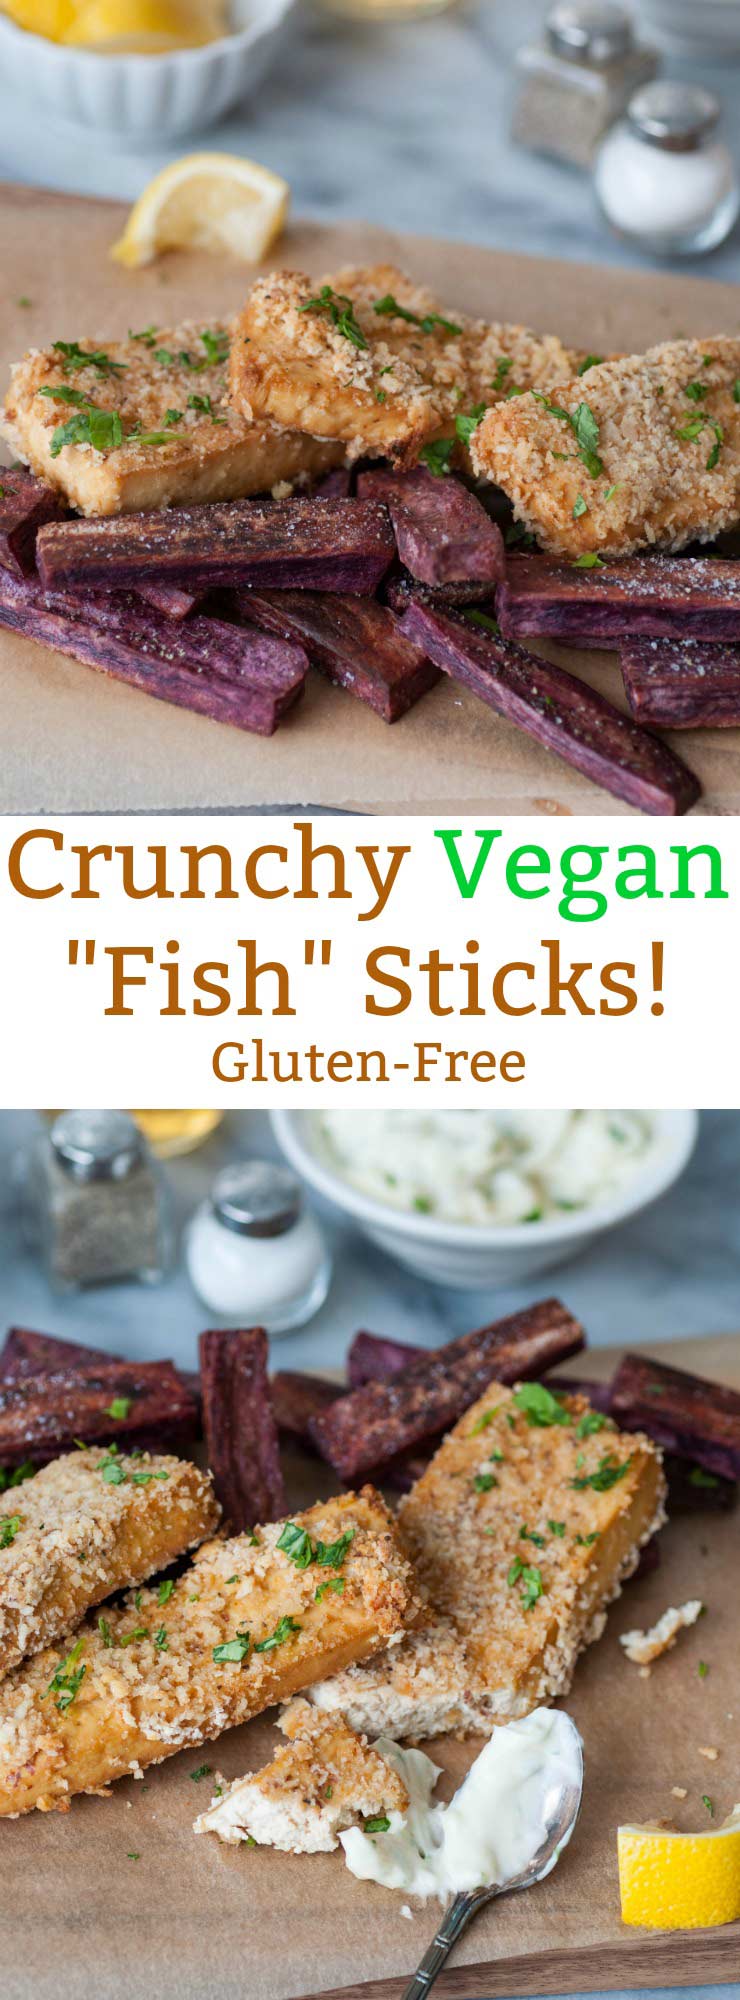 Crunchy Oven Fried Vegan Fish Sticks! These are gluten-free and oil-free! They have the perfect crunch and a nice flavor. Make them for dinner or for appetizers. 